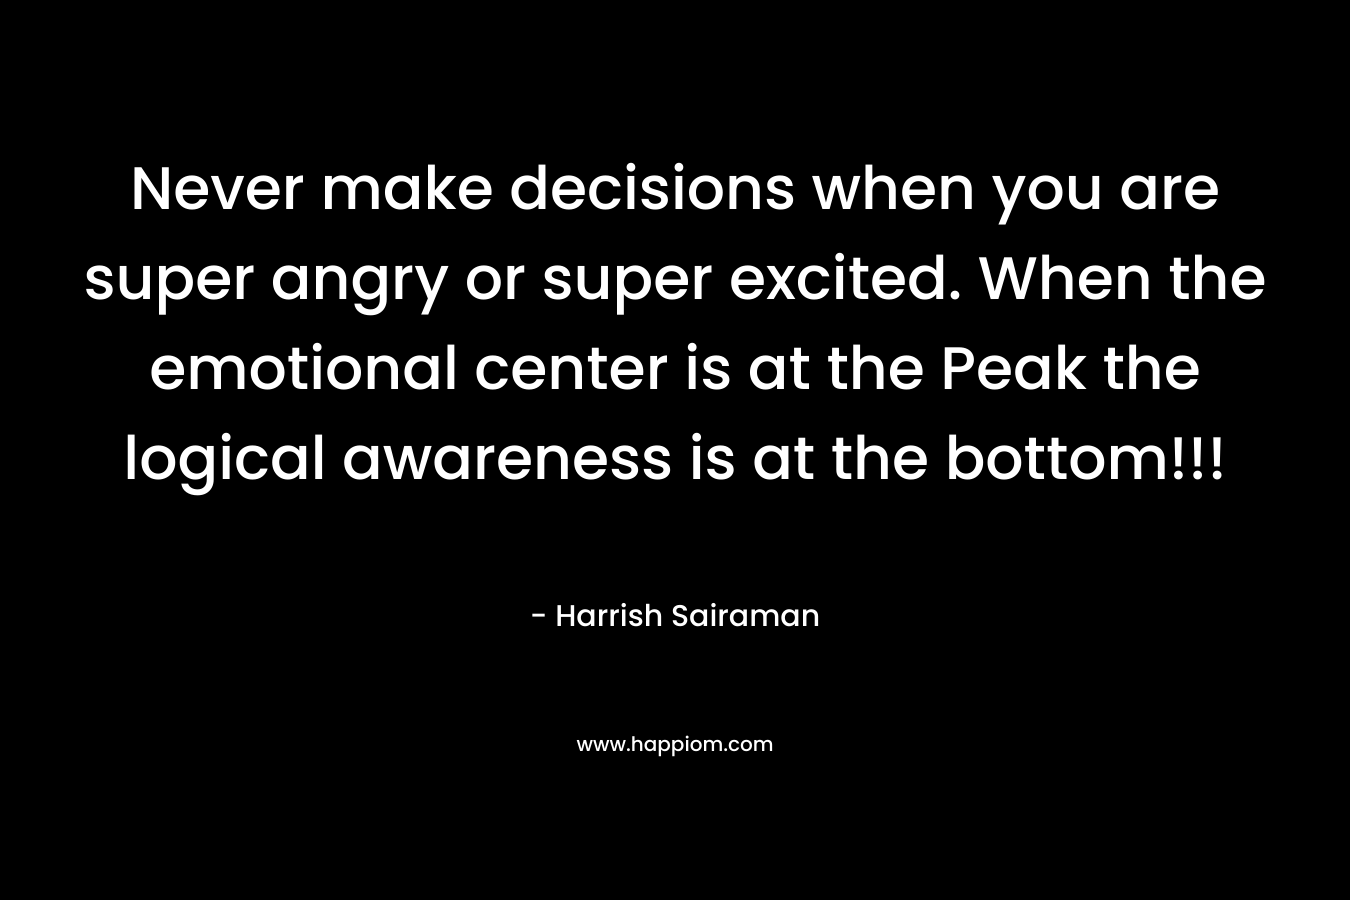 Never make decisions when you are super angry or super excited. When the emotional center is at the Peak the logical awareness is at the bottom!!! – Harrish Sairaman